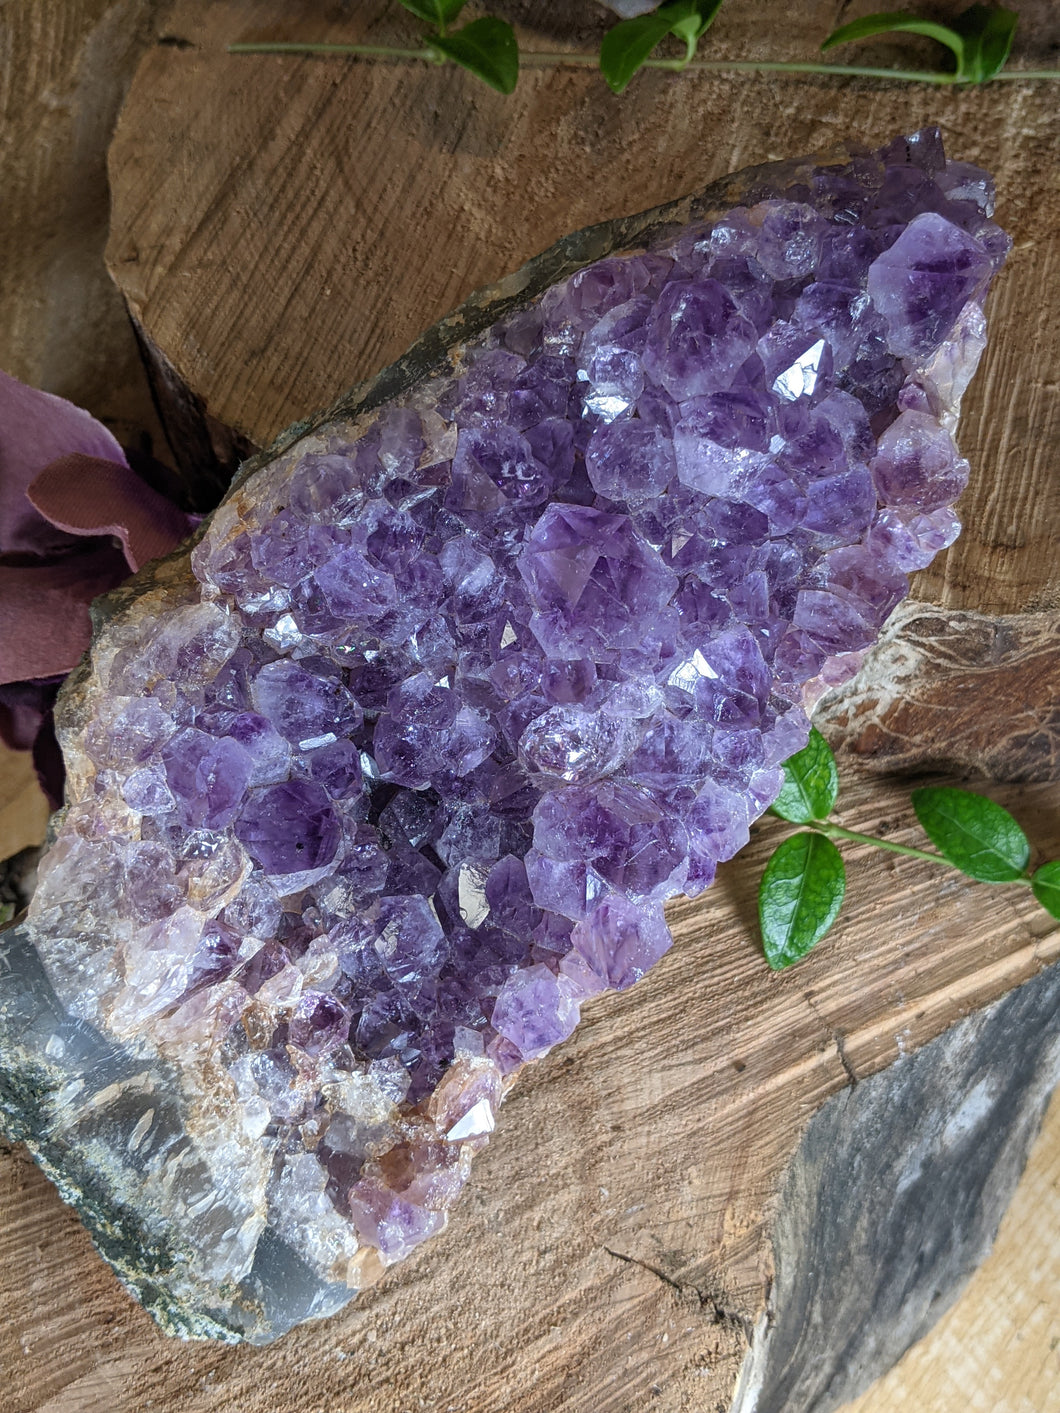 Large amethyst cluster on a wooden stump with periwinkle leaves.